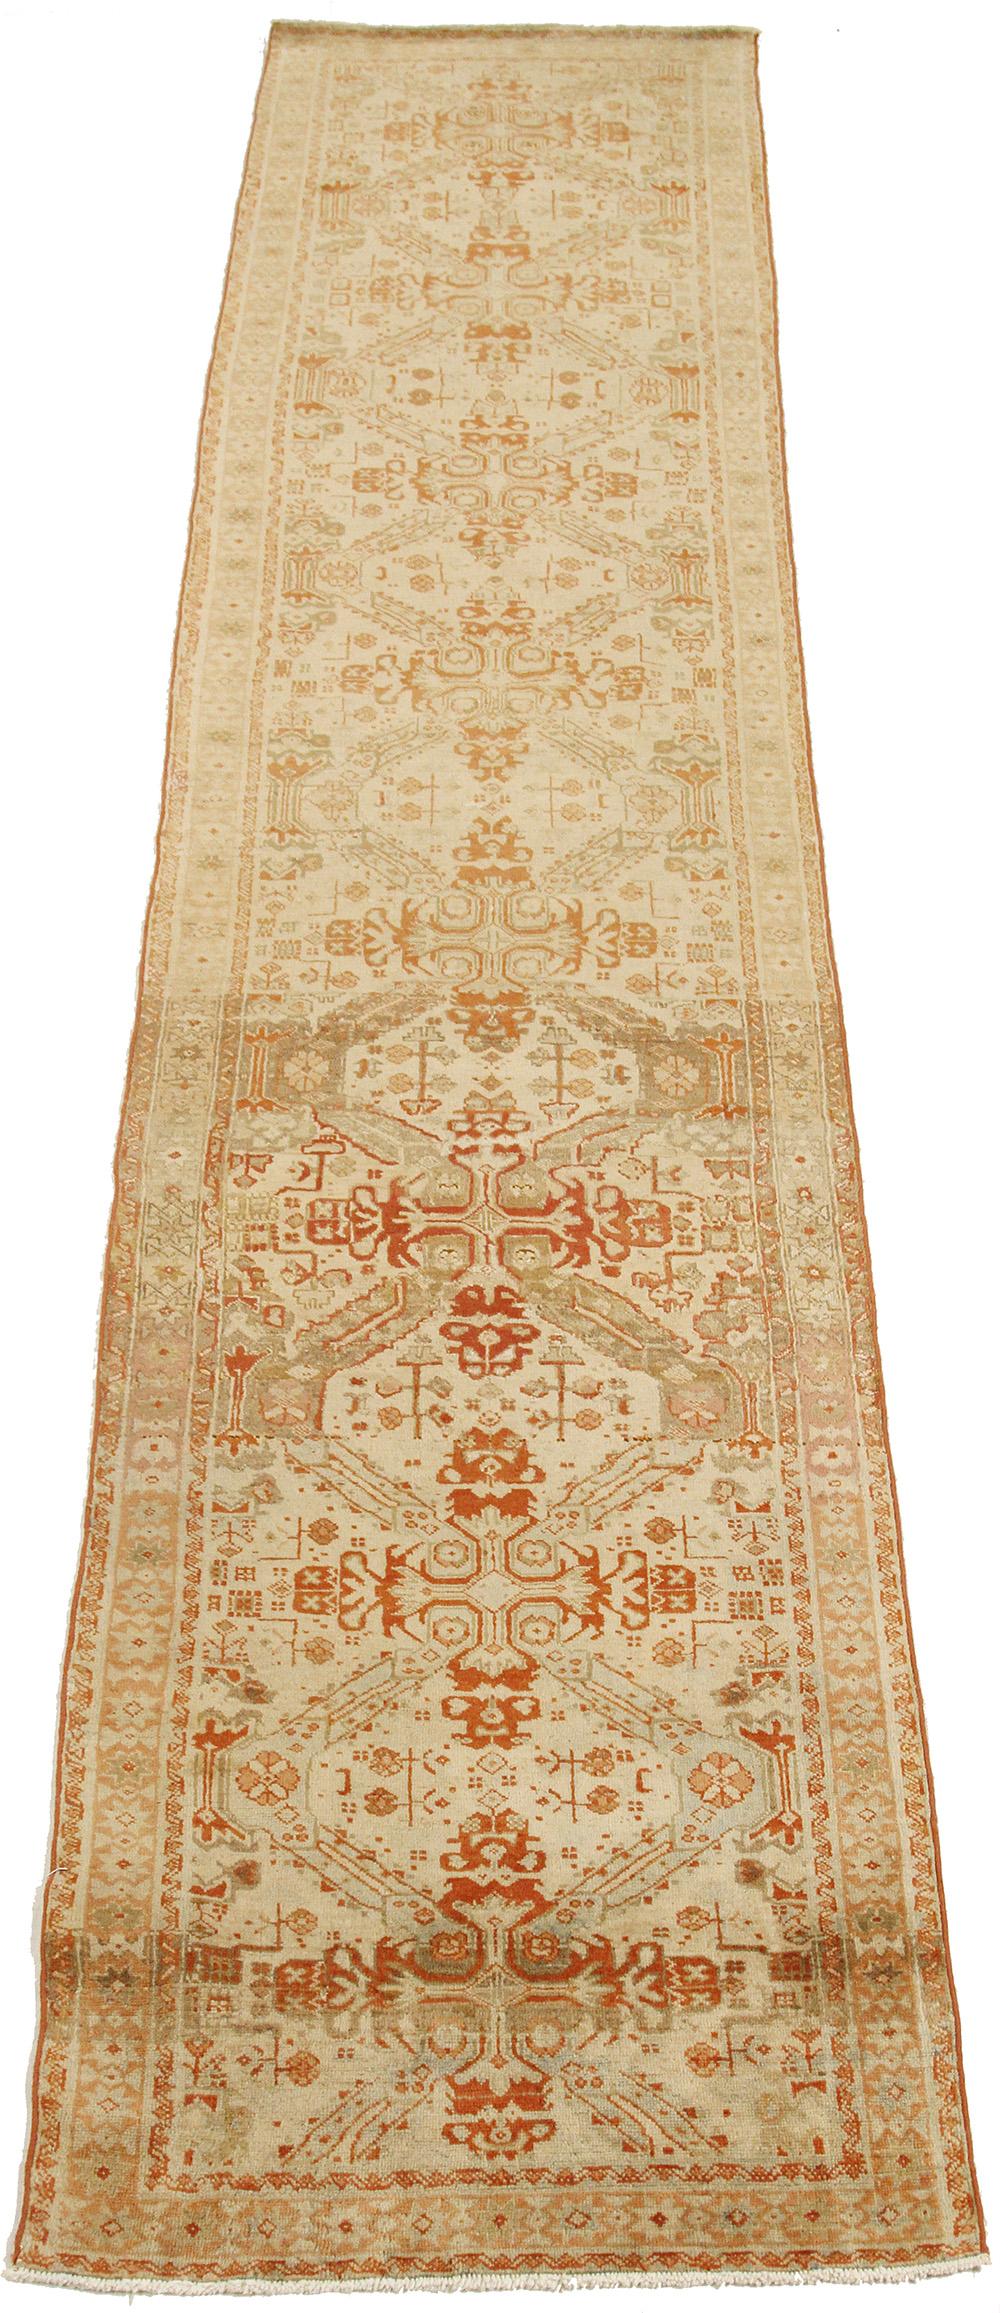 Antique Persian rug handwoven from the finest sheep’s wool and colored with all-natural vegetable dyes that are safe for humans and pets. It’s a traditional Tabriz weaving featuring a lovely ensemble of botanical designs in red and orange over an